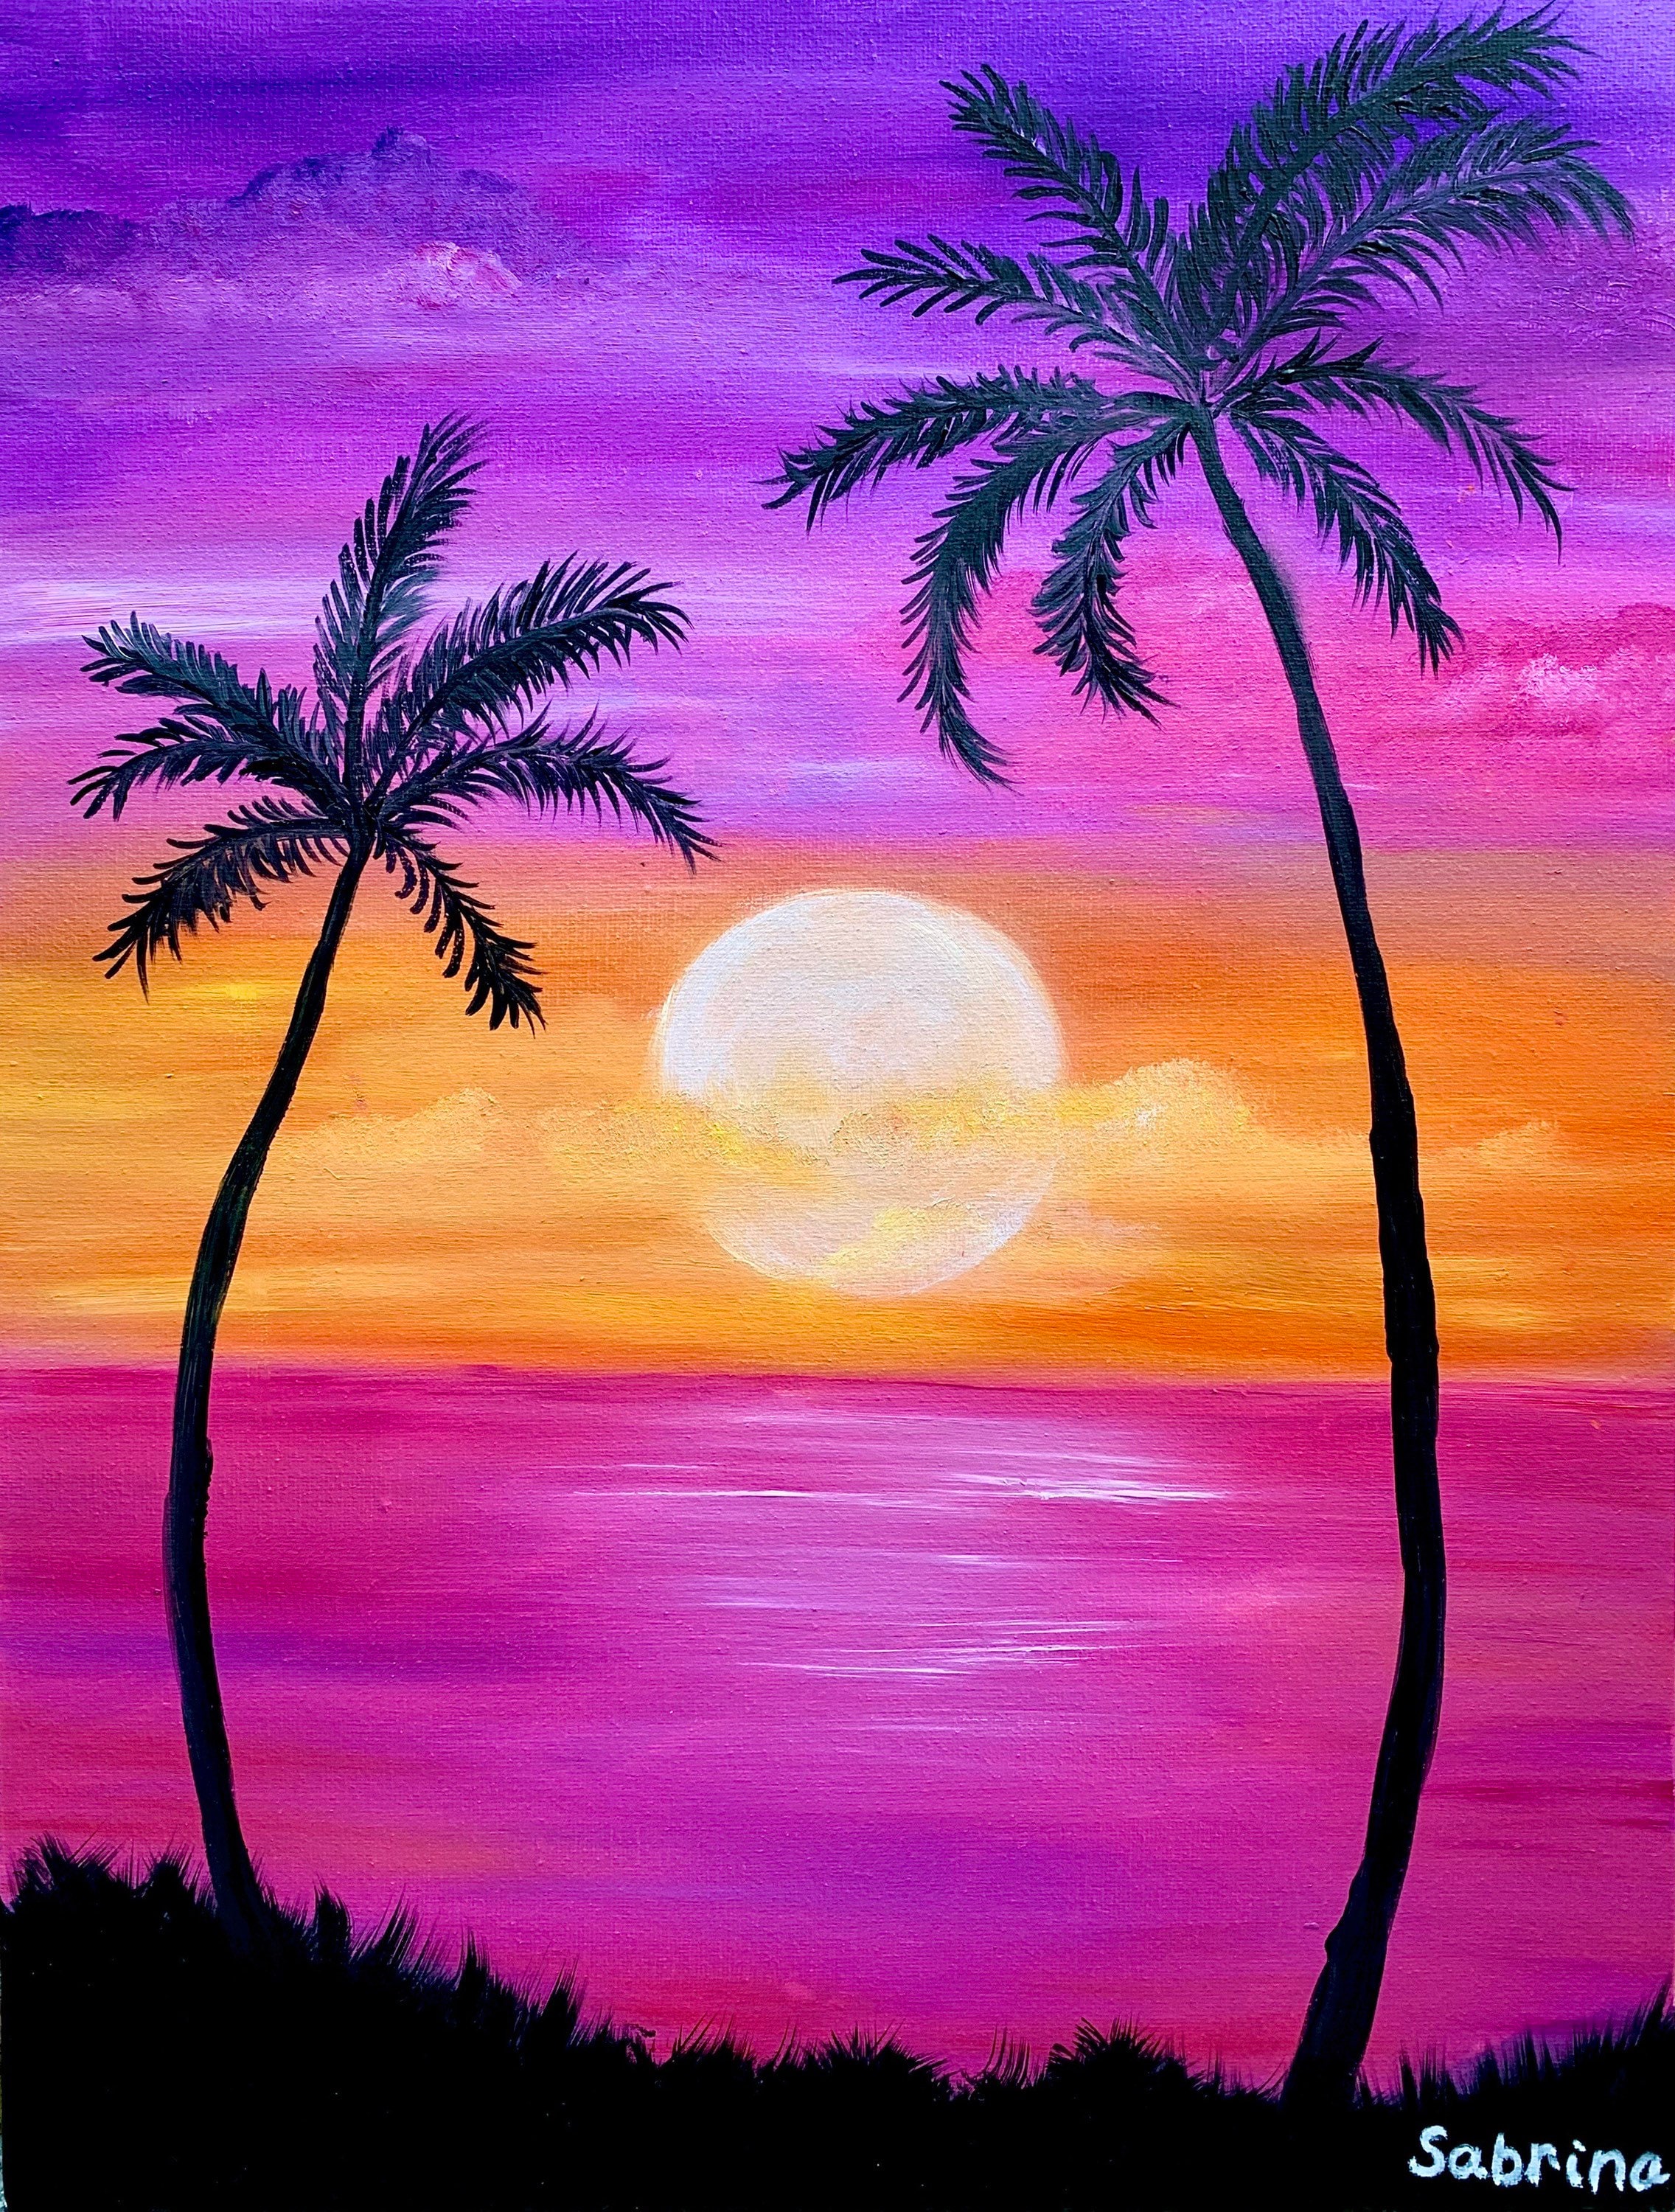 Watercolor Painting Ideas for Beginners - How to Paint a Cotton Candy  Sunset with Palm Trees 